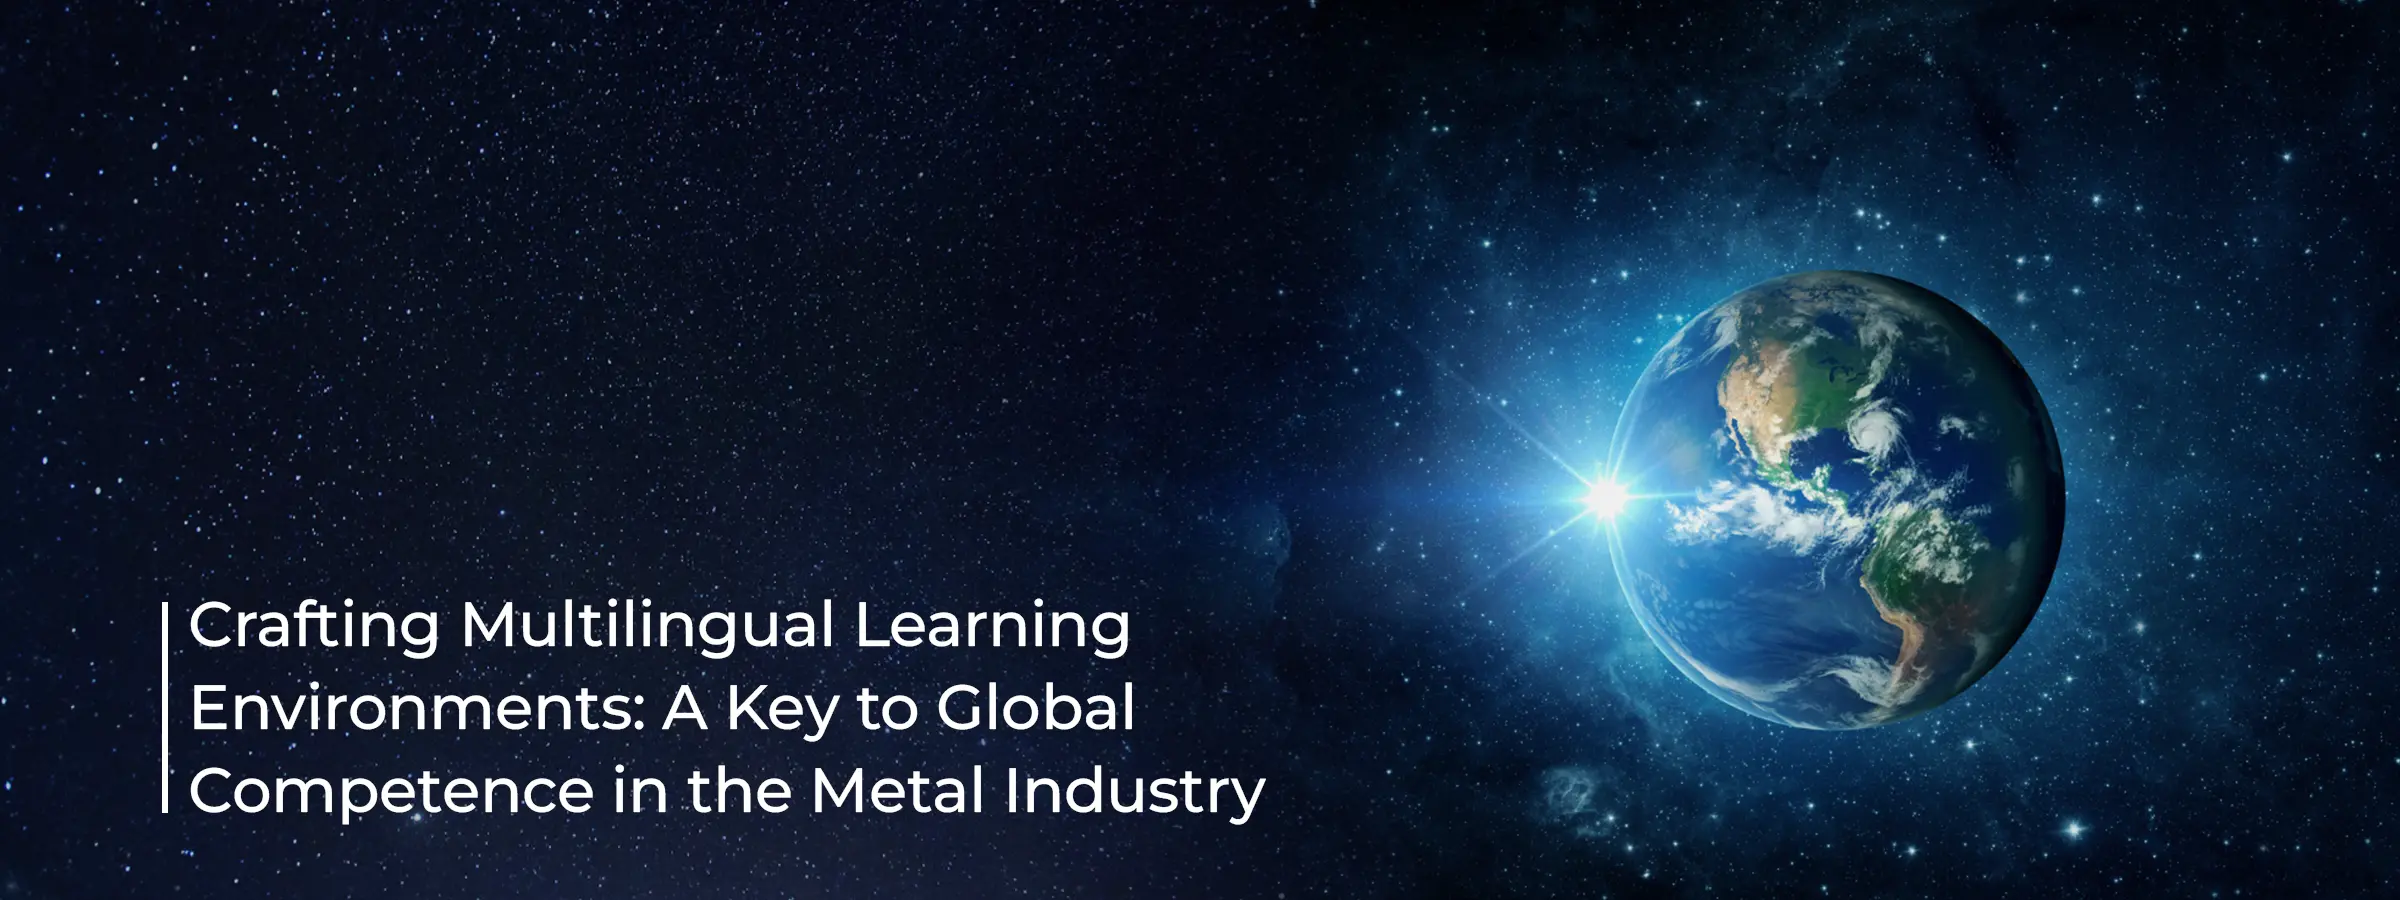 crafting-multilingual-learning-environments-a-key-to-global-competence-in-the-metal-industry